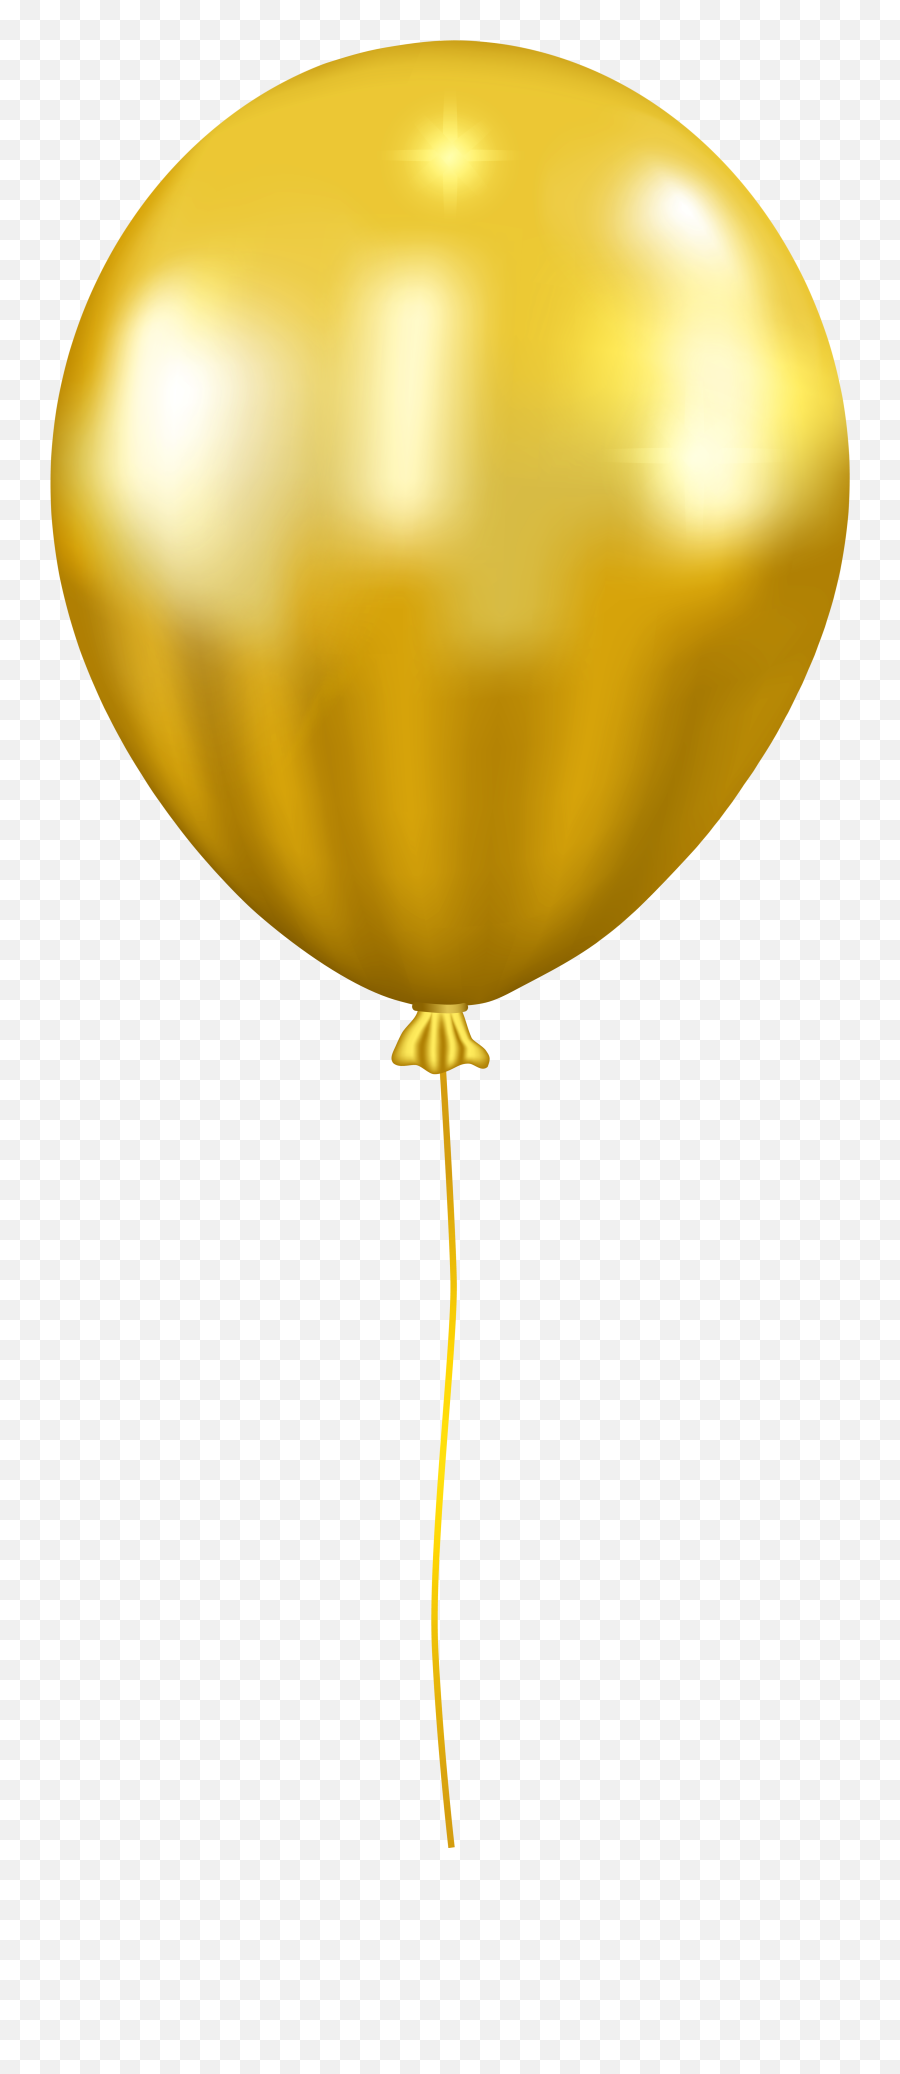 Download Free Png Gold Balloon Transparent Image Gallery - High Resolution Gold Balloon Png,Balloons With Transparent Background